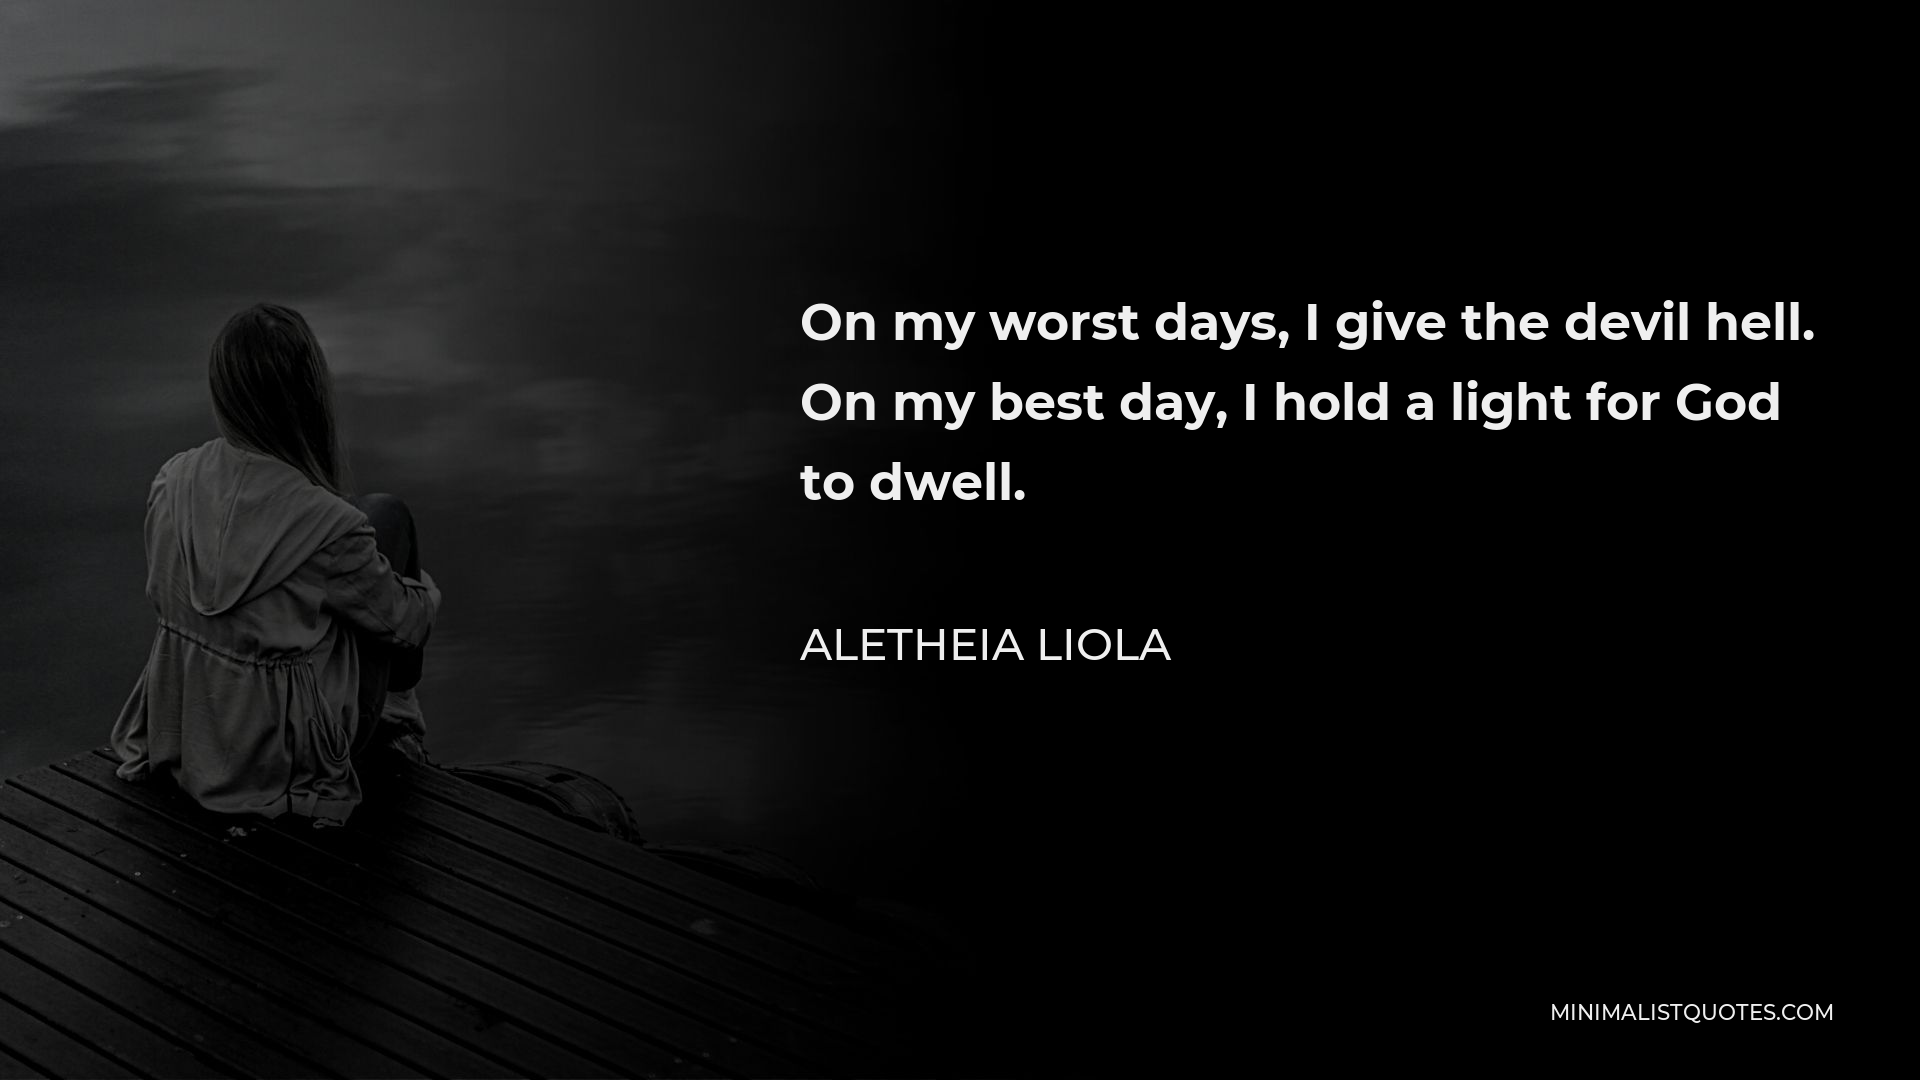 Aletheia Liola Quote - On my worst days, I give the devil hell. On my best day, I hold a light for God to dwell.